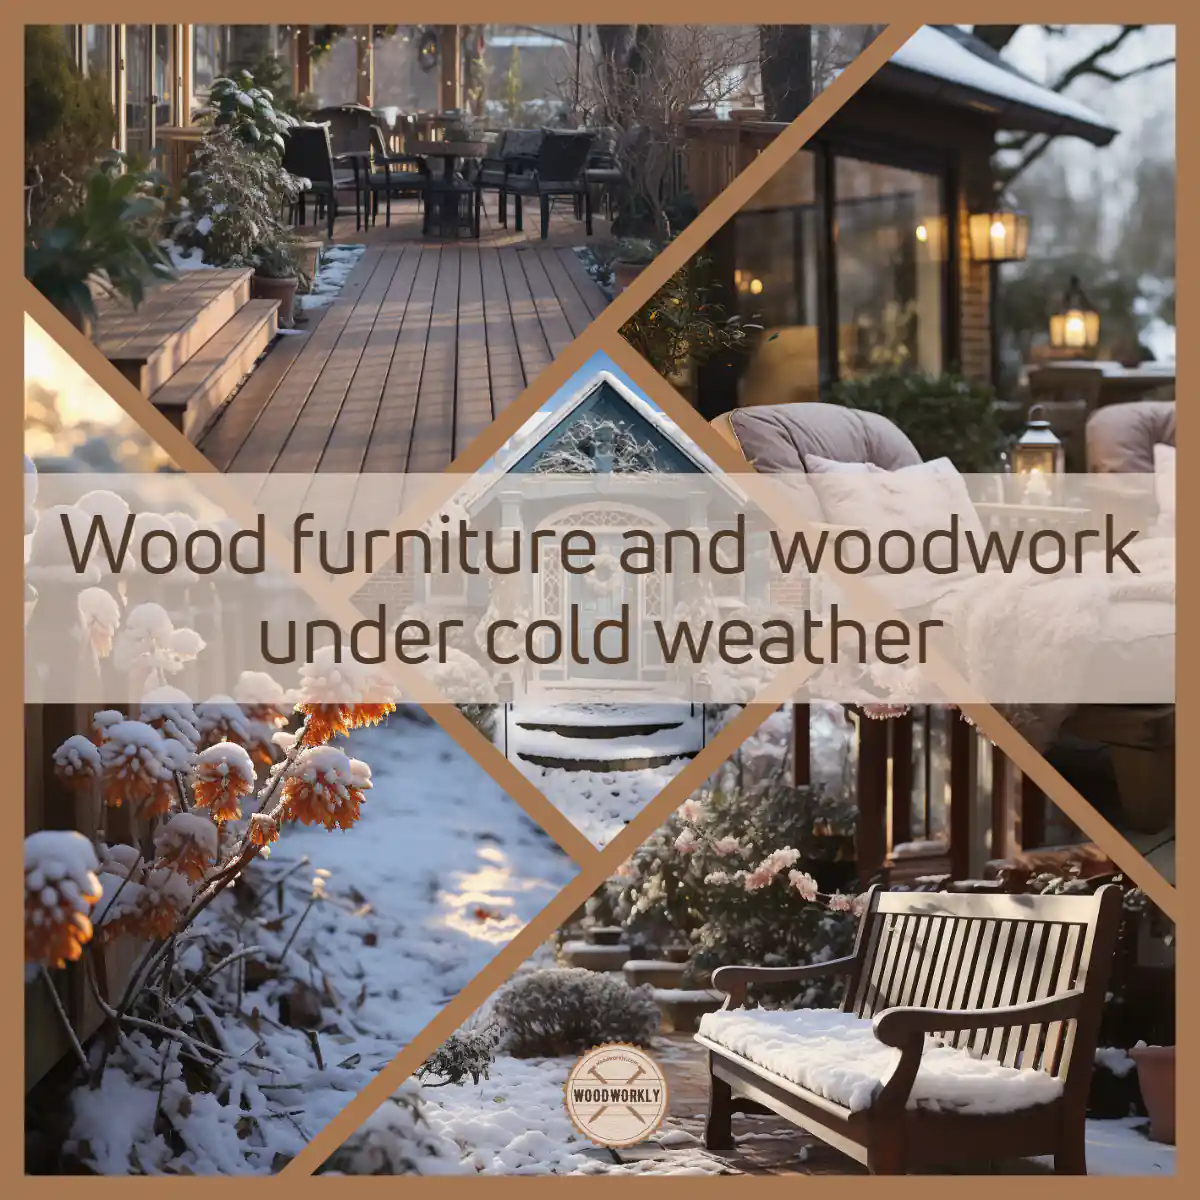 Wood furniture and woodwork under cold weather